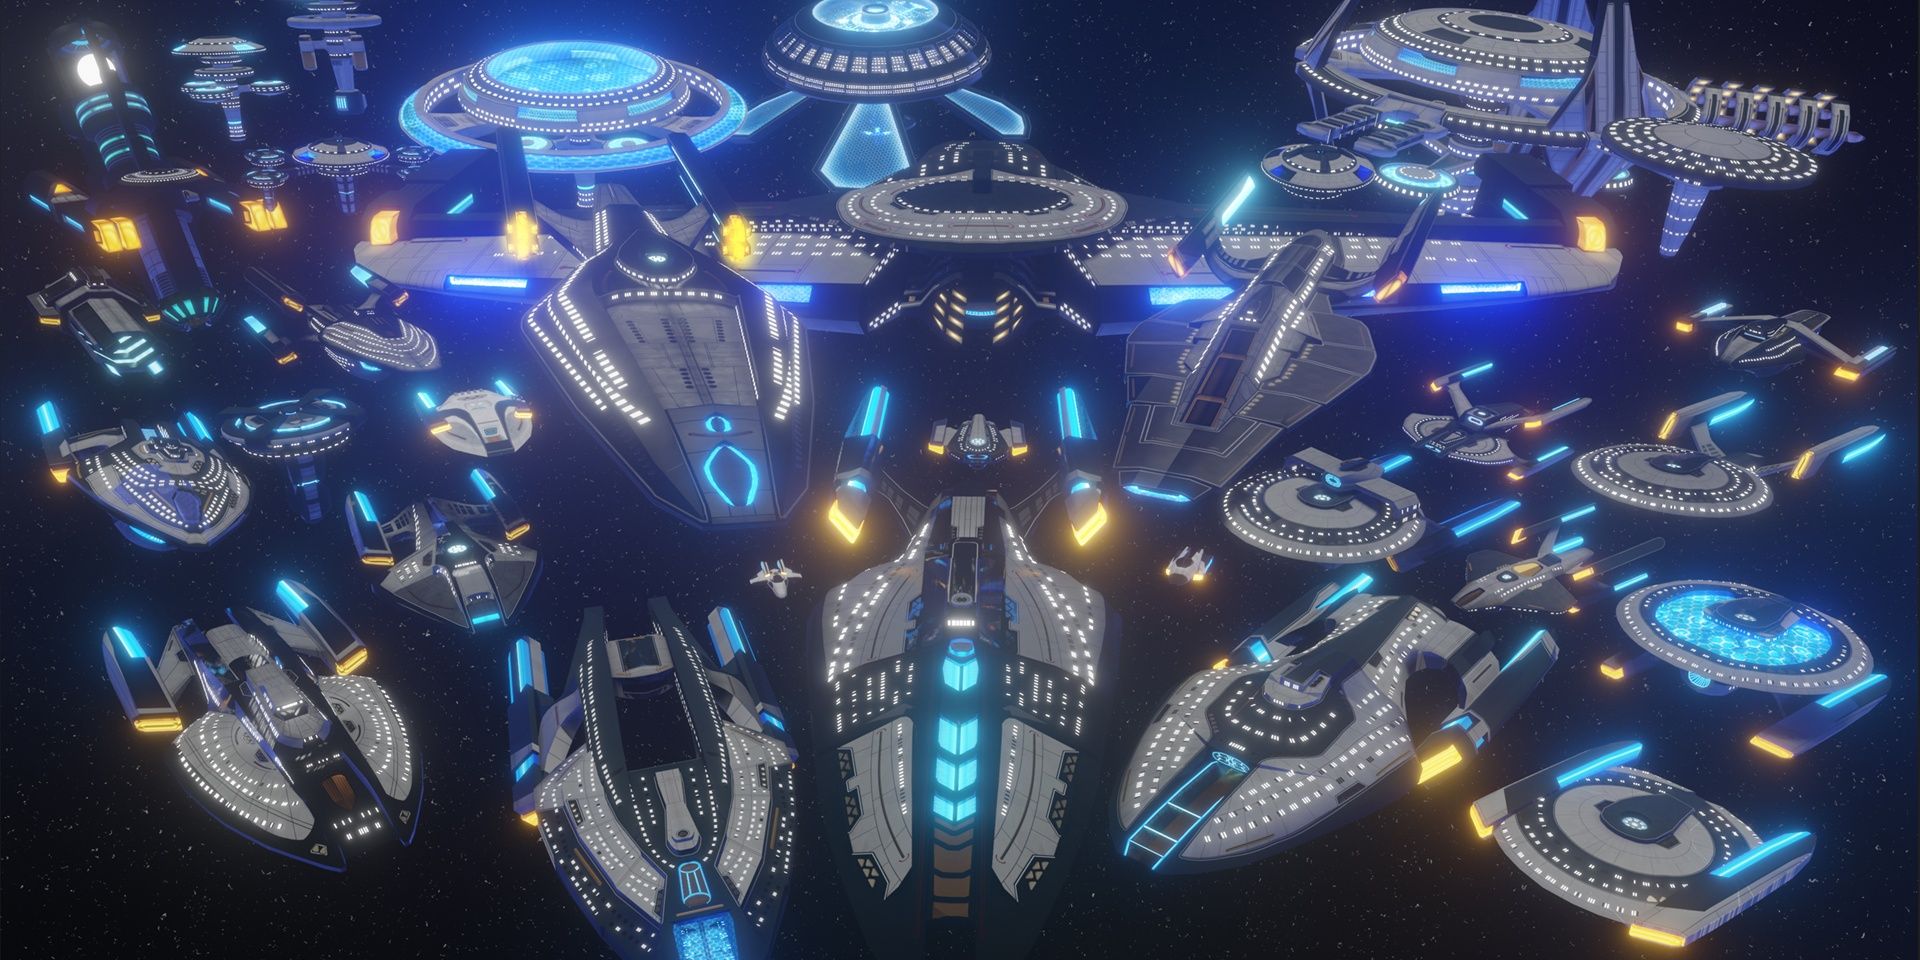 Many spaceships that you can build in Stellaris.